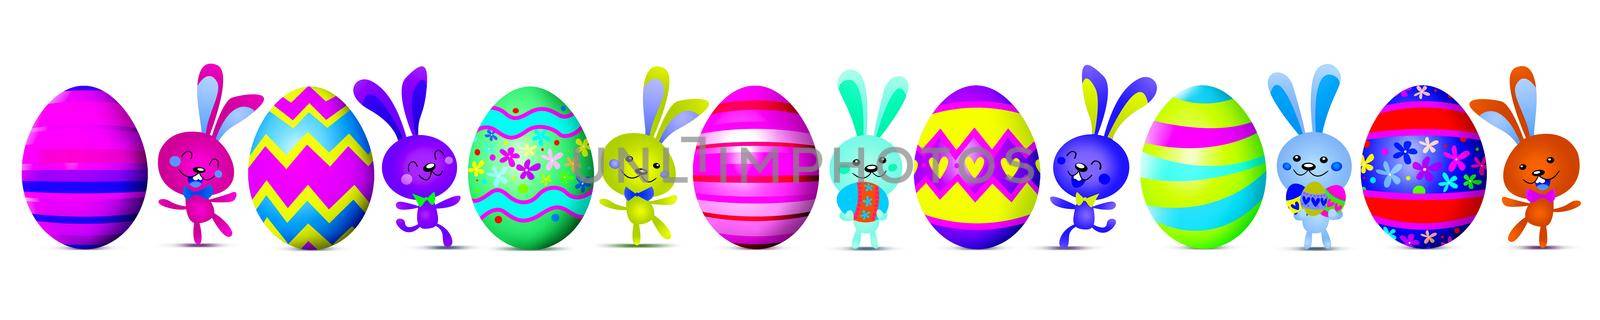 Easter composition with rabbit. Festive decoration. Happy Easter. 3d illustration